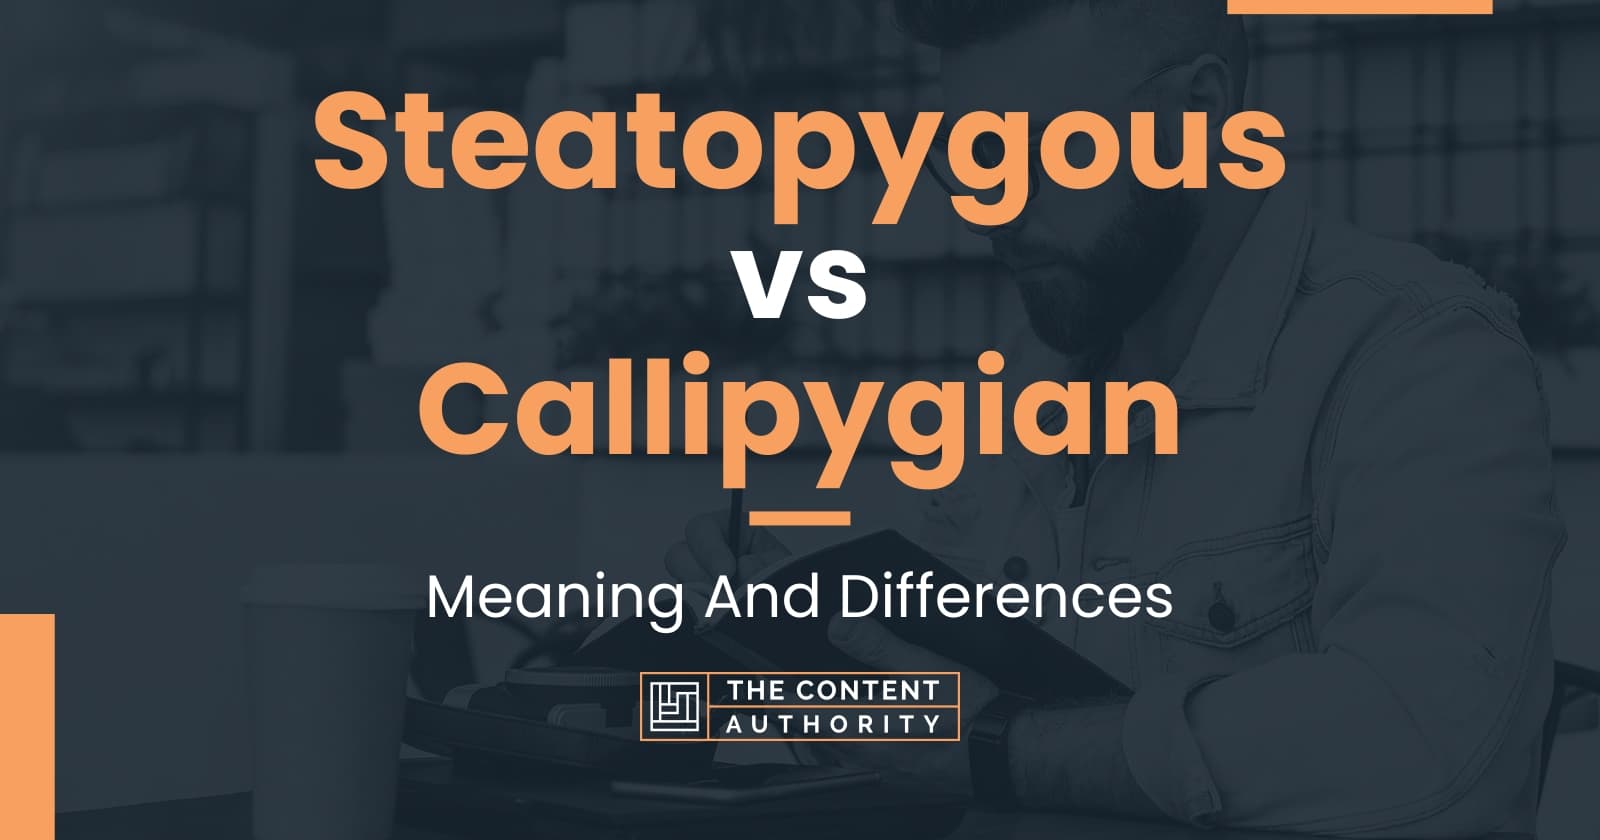 Steatopygous vs Callipygian: Meaning And Differences